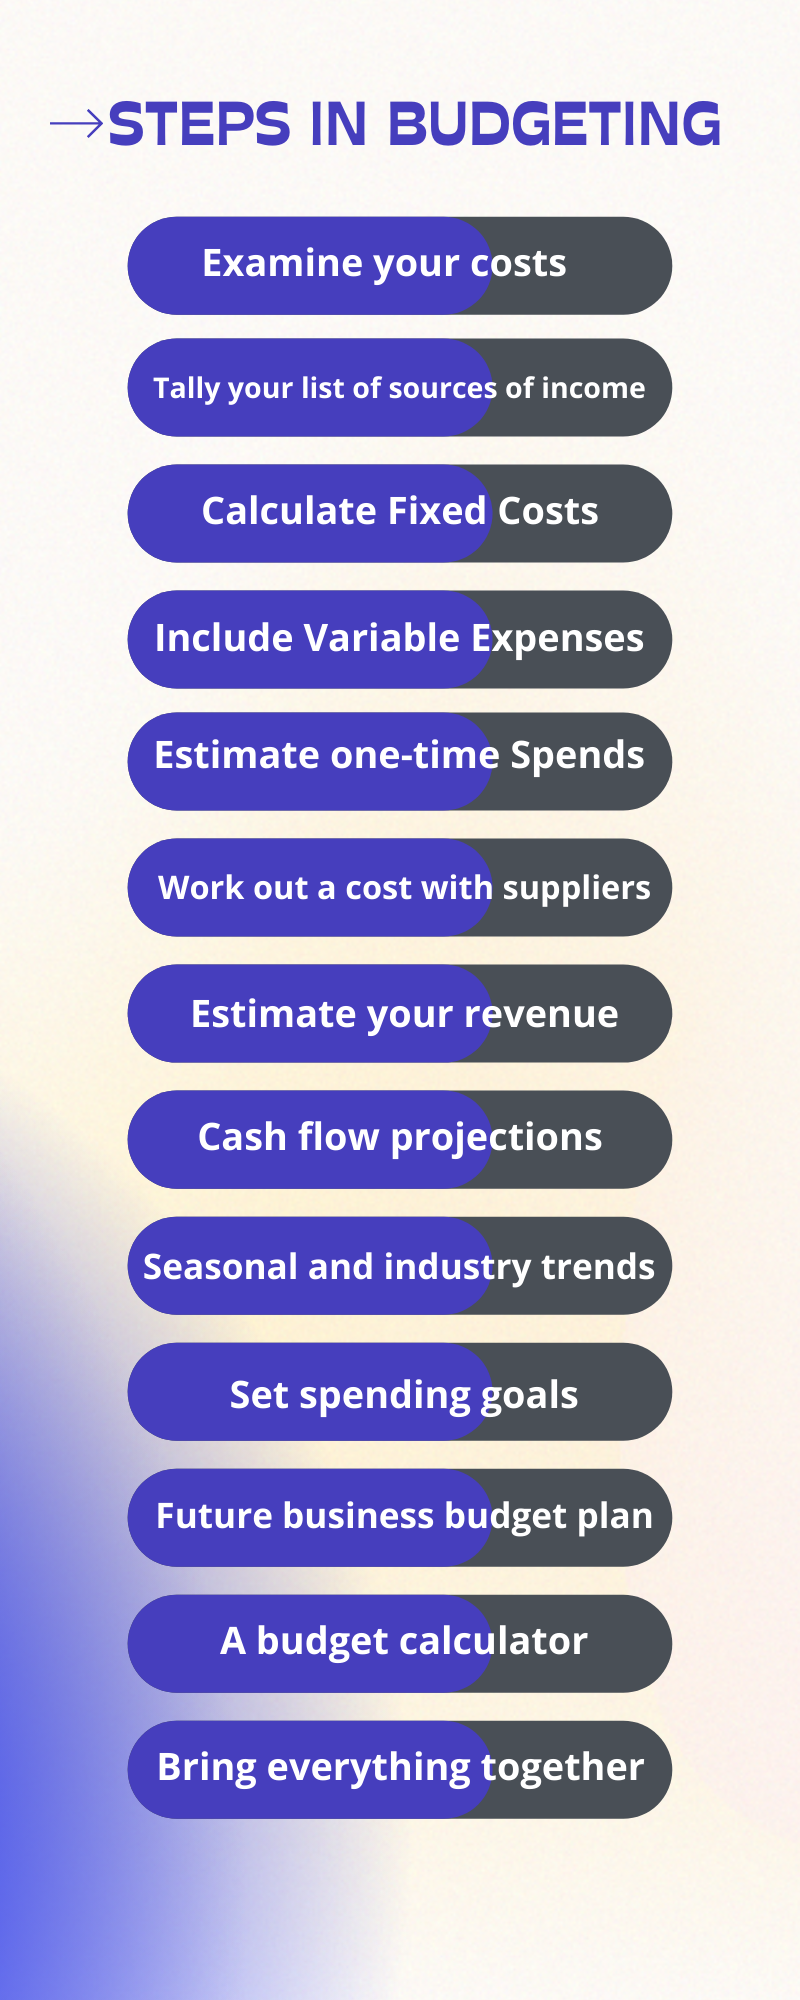 What are one-time expenses/revenues